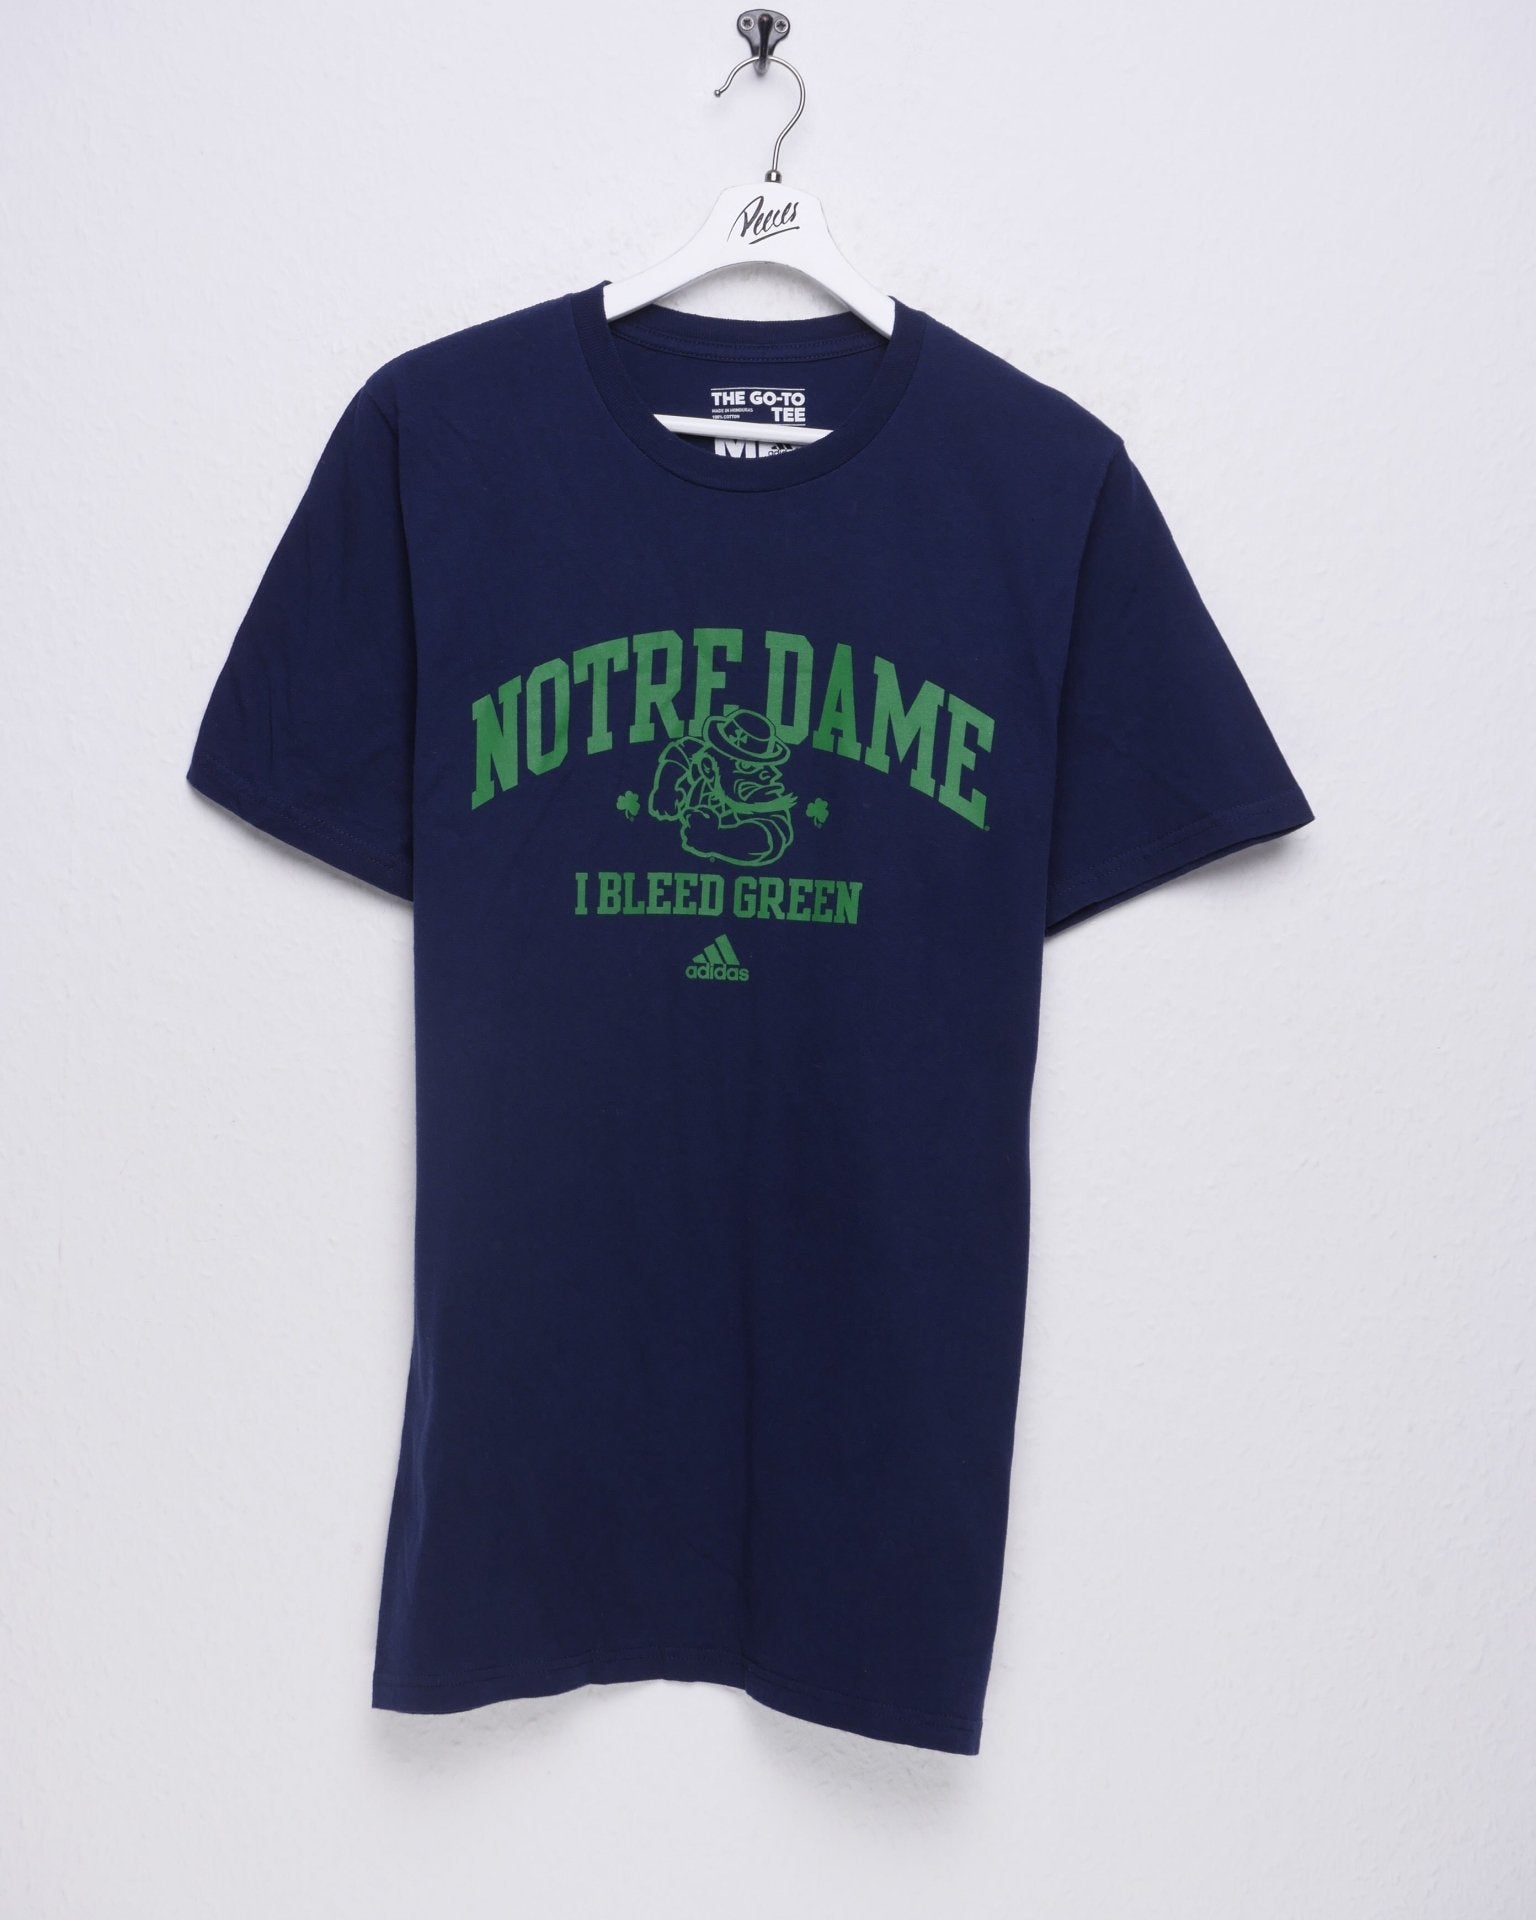 Adidas printed Notre Dame Spellout Vintage Shirt - Peeces